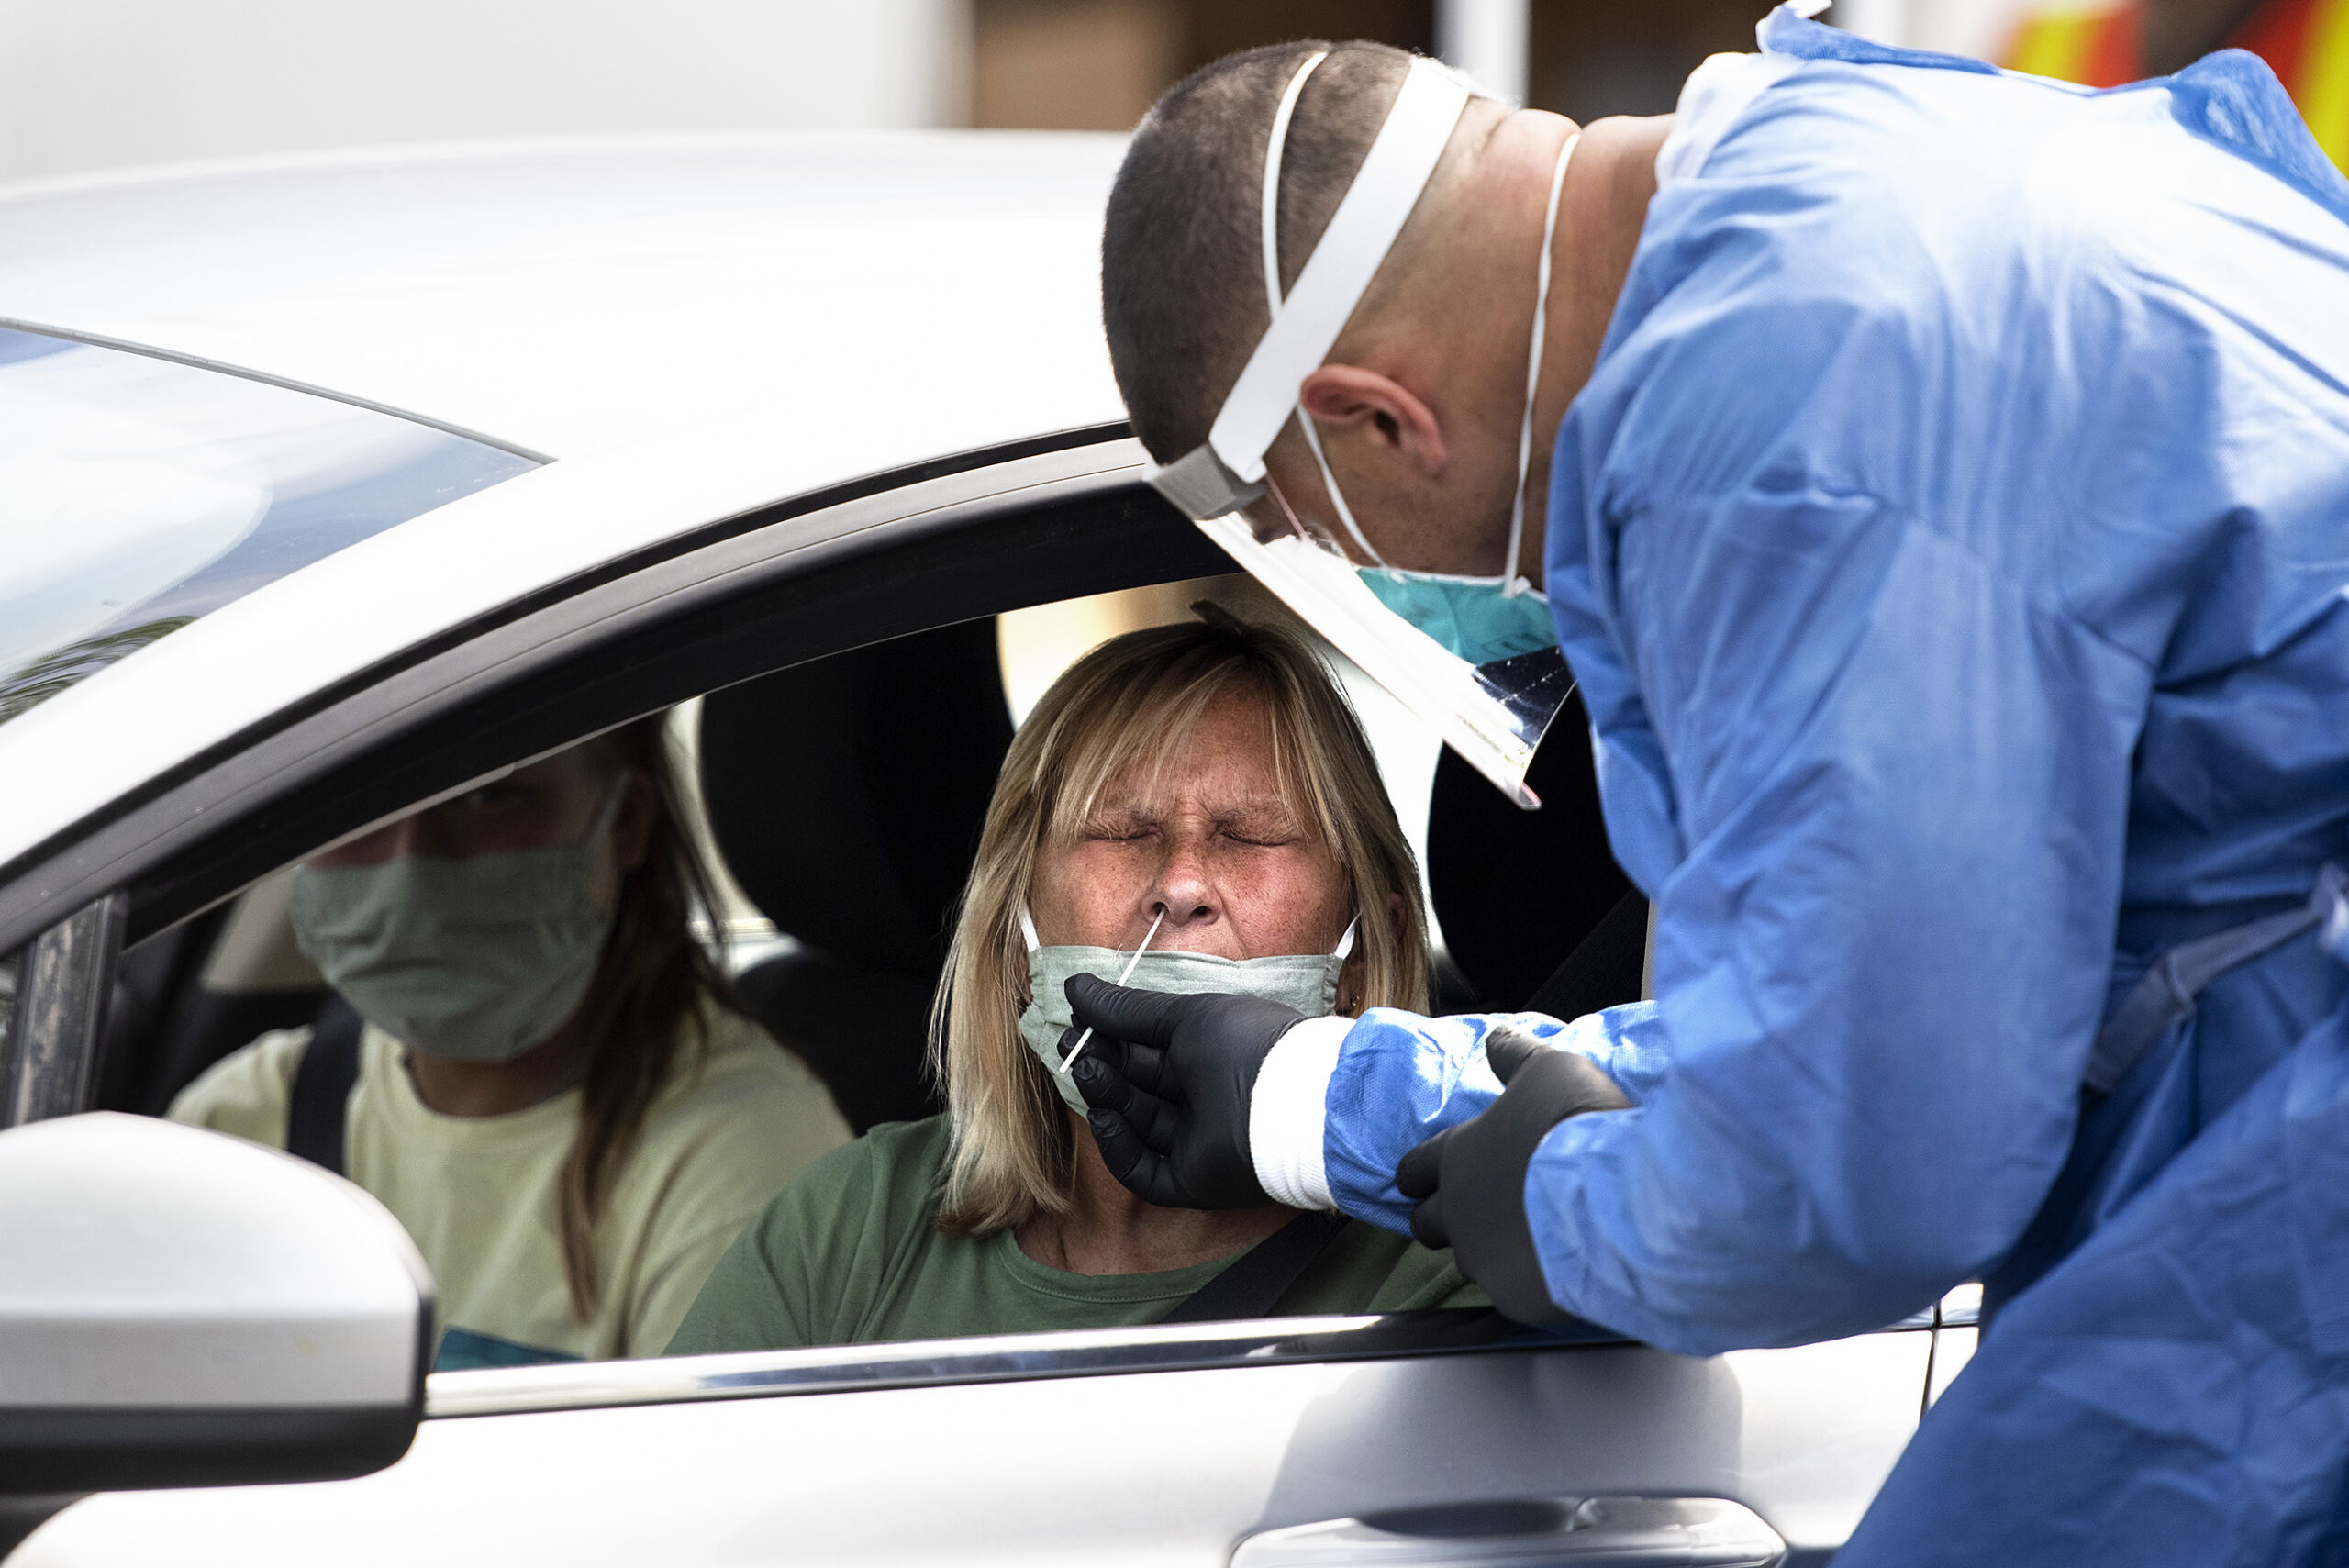 A woman's nose is swabbed while receiving a COVID-19 test at a drive thru location